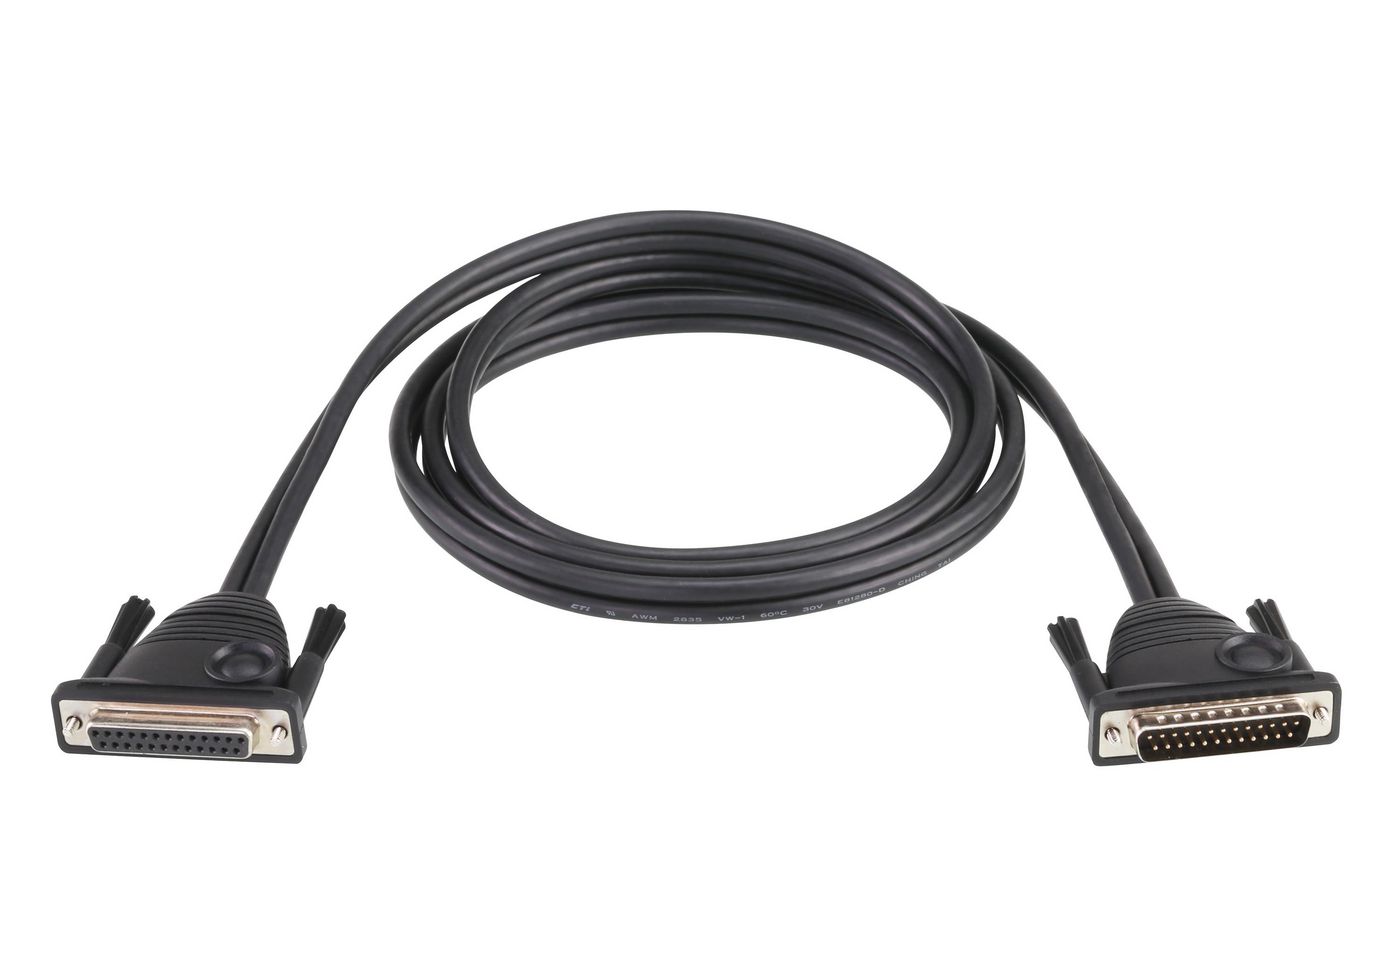 Daisy Chain Cable For KVM 3m - A2l2703